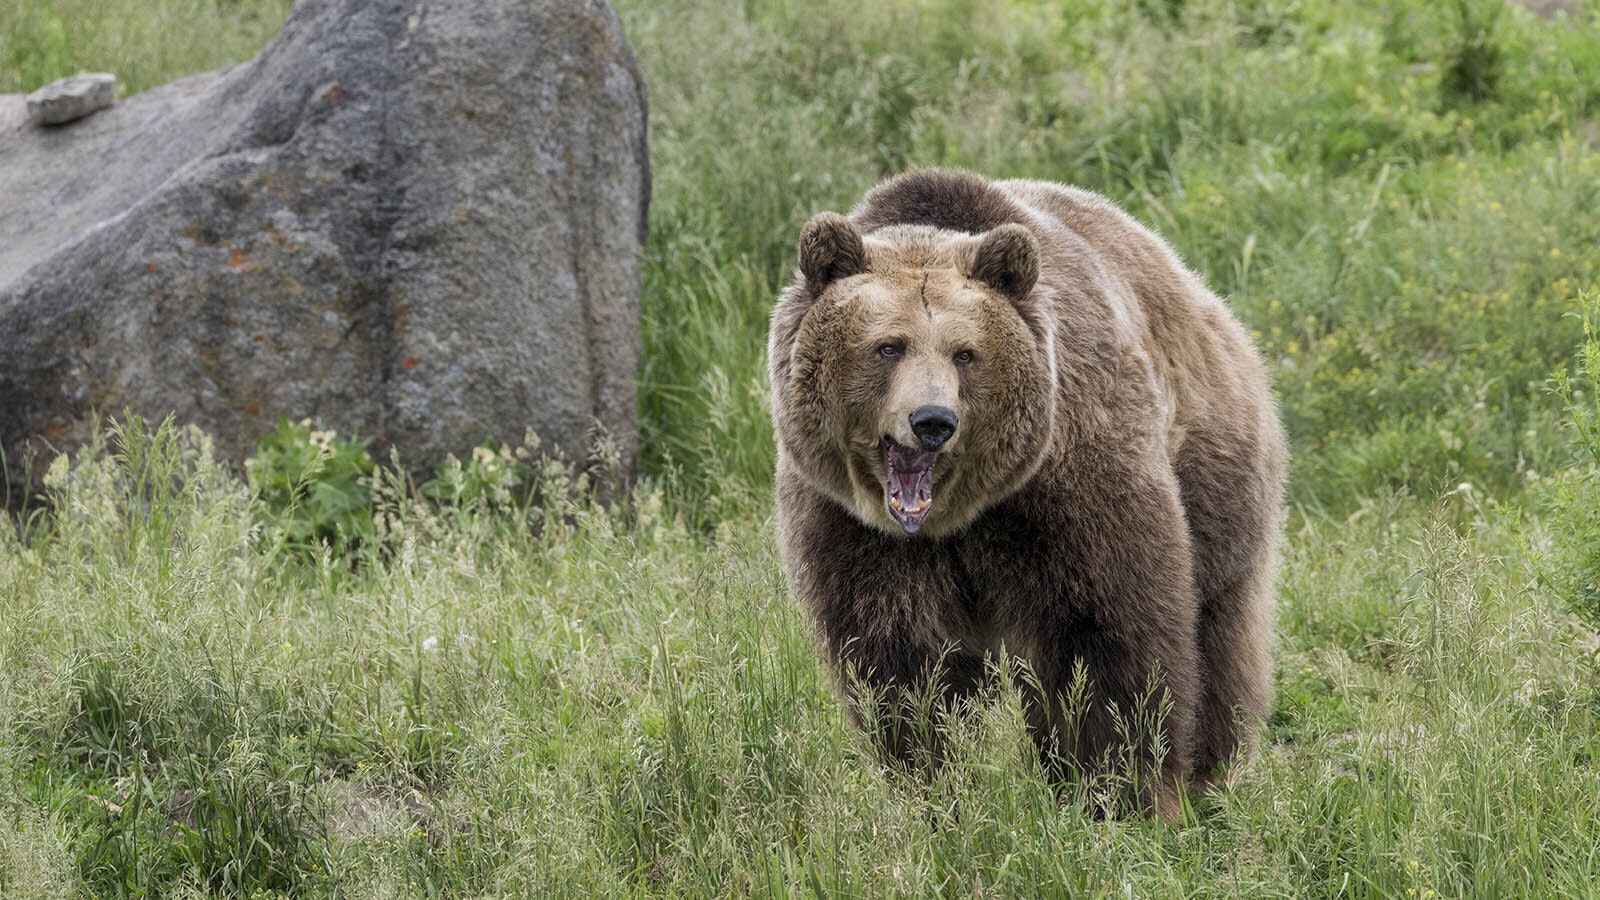 A grizzly vocalizes in the Wyoming wilderness in this file photo. A young male grizzly was confirmed in the Bighorn Mountains of Wyoming, Game and Fish announced Monday, the first confirmation of years of rumors and stories that grizzlies have pushed east from Yellowstone.